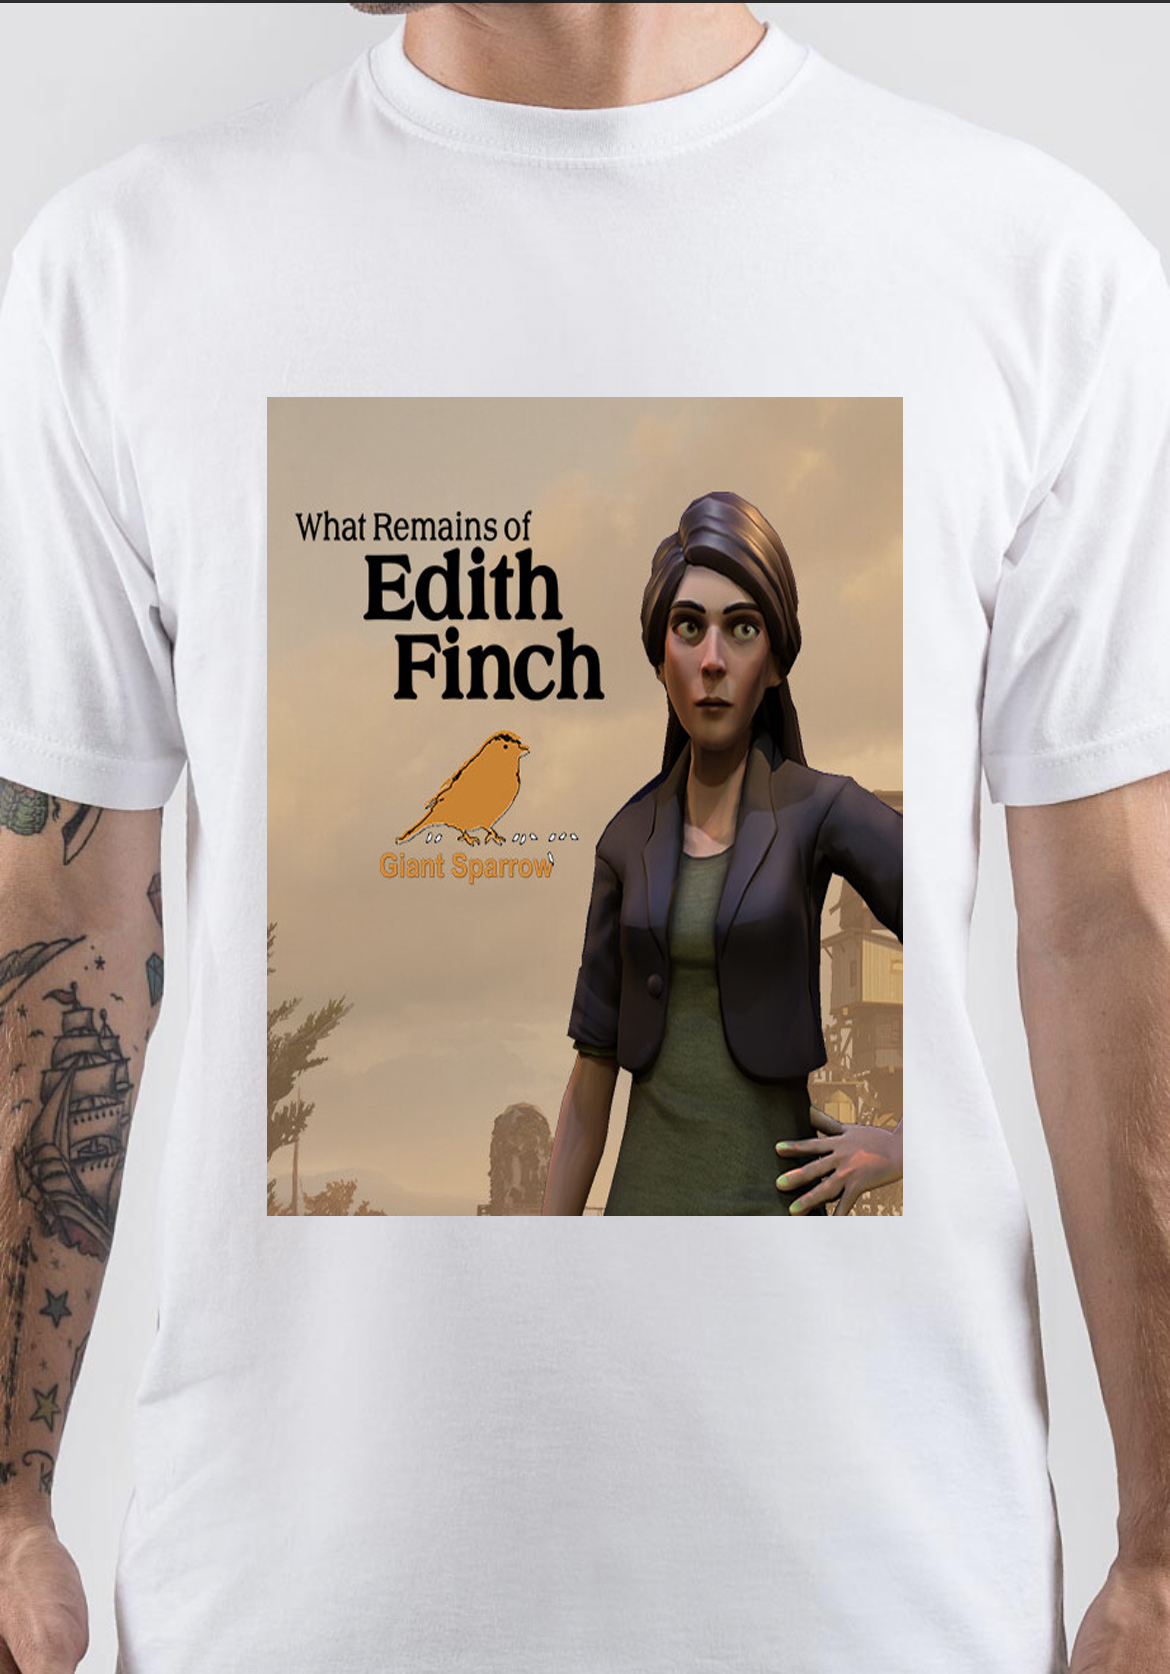 Edith Finch T-Shirt And Merchandise